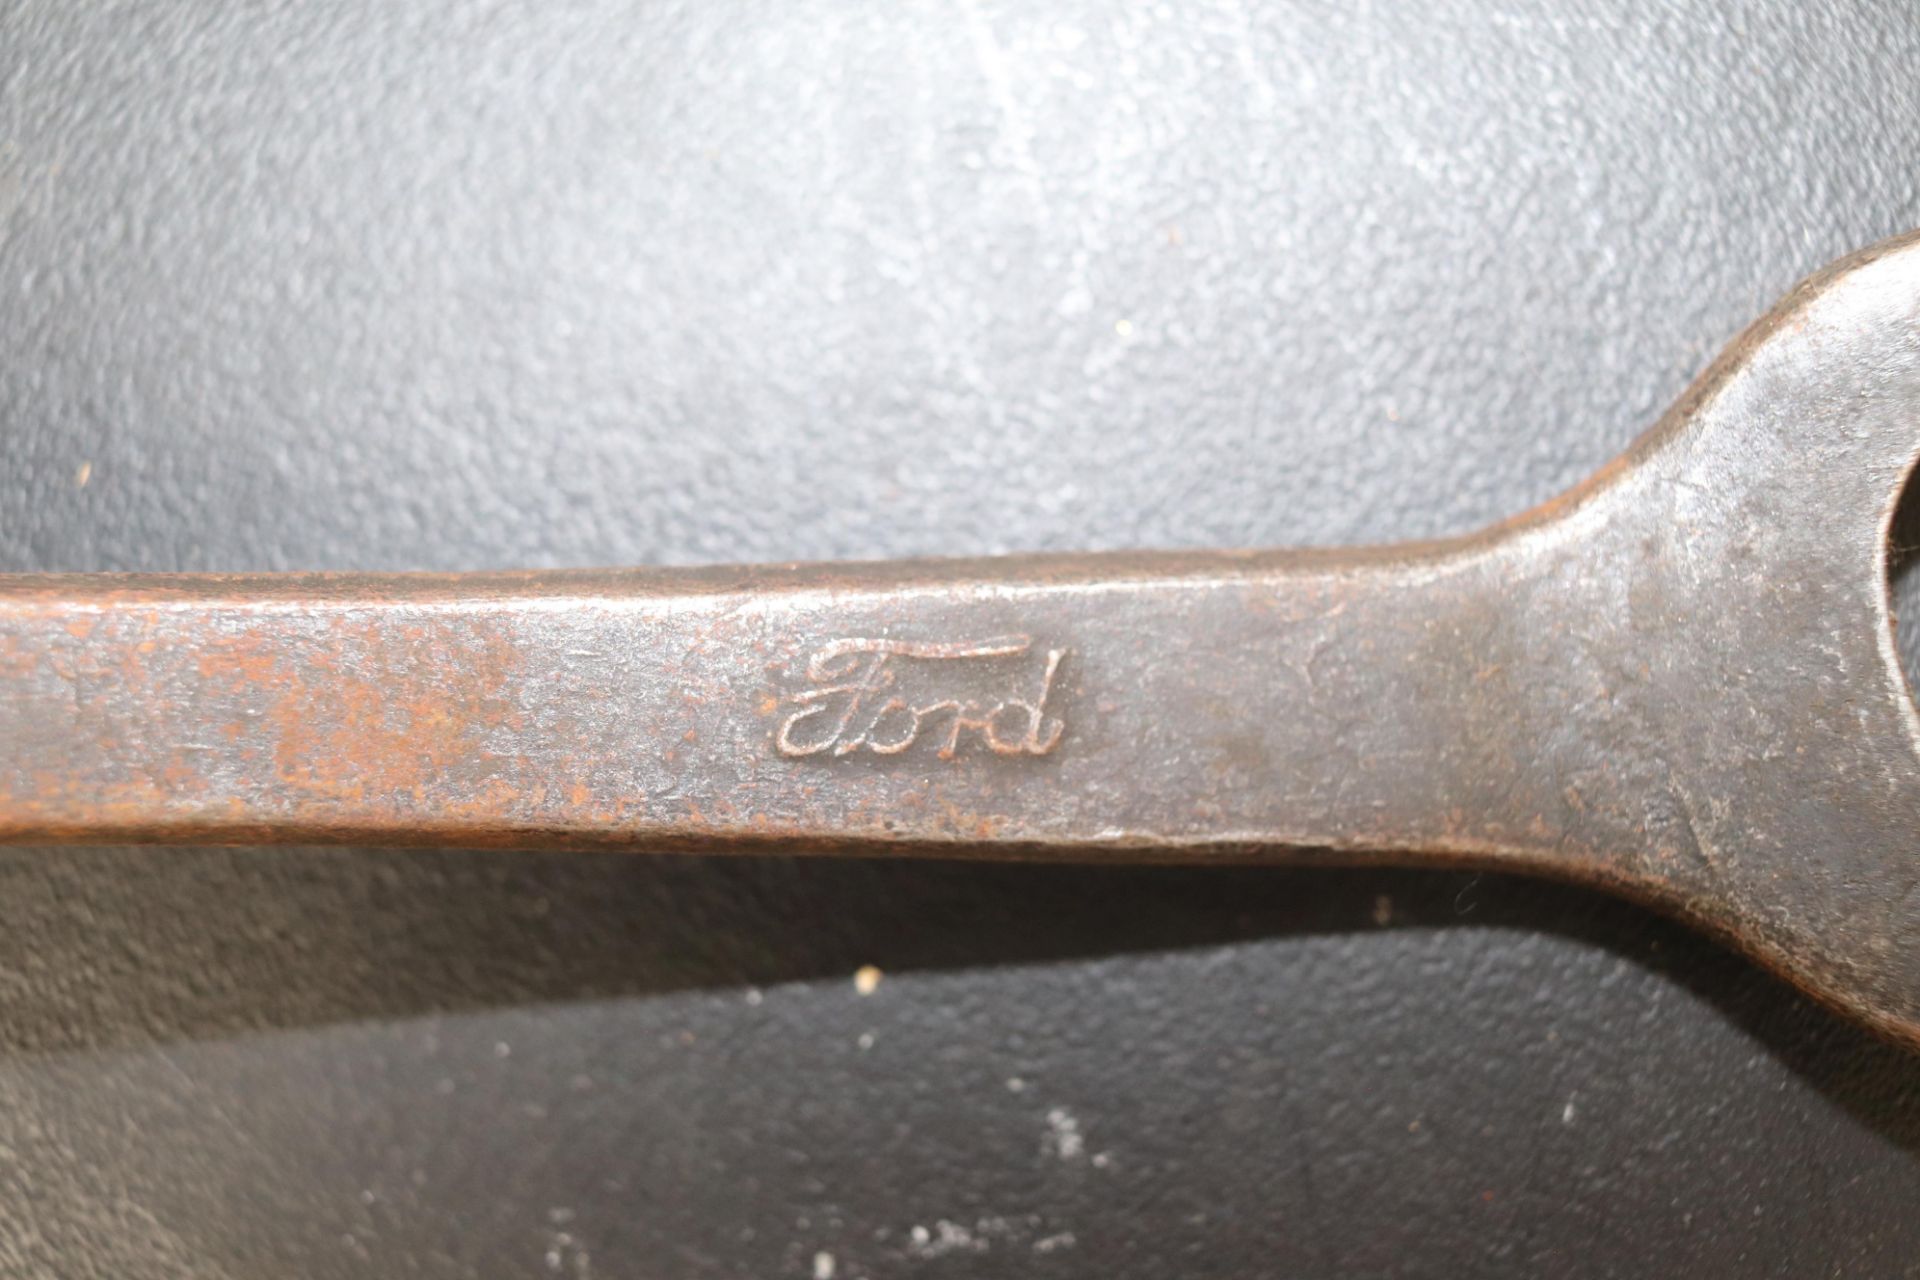 Ford Model T wrench - Image 3 of 6